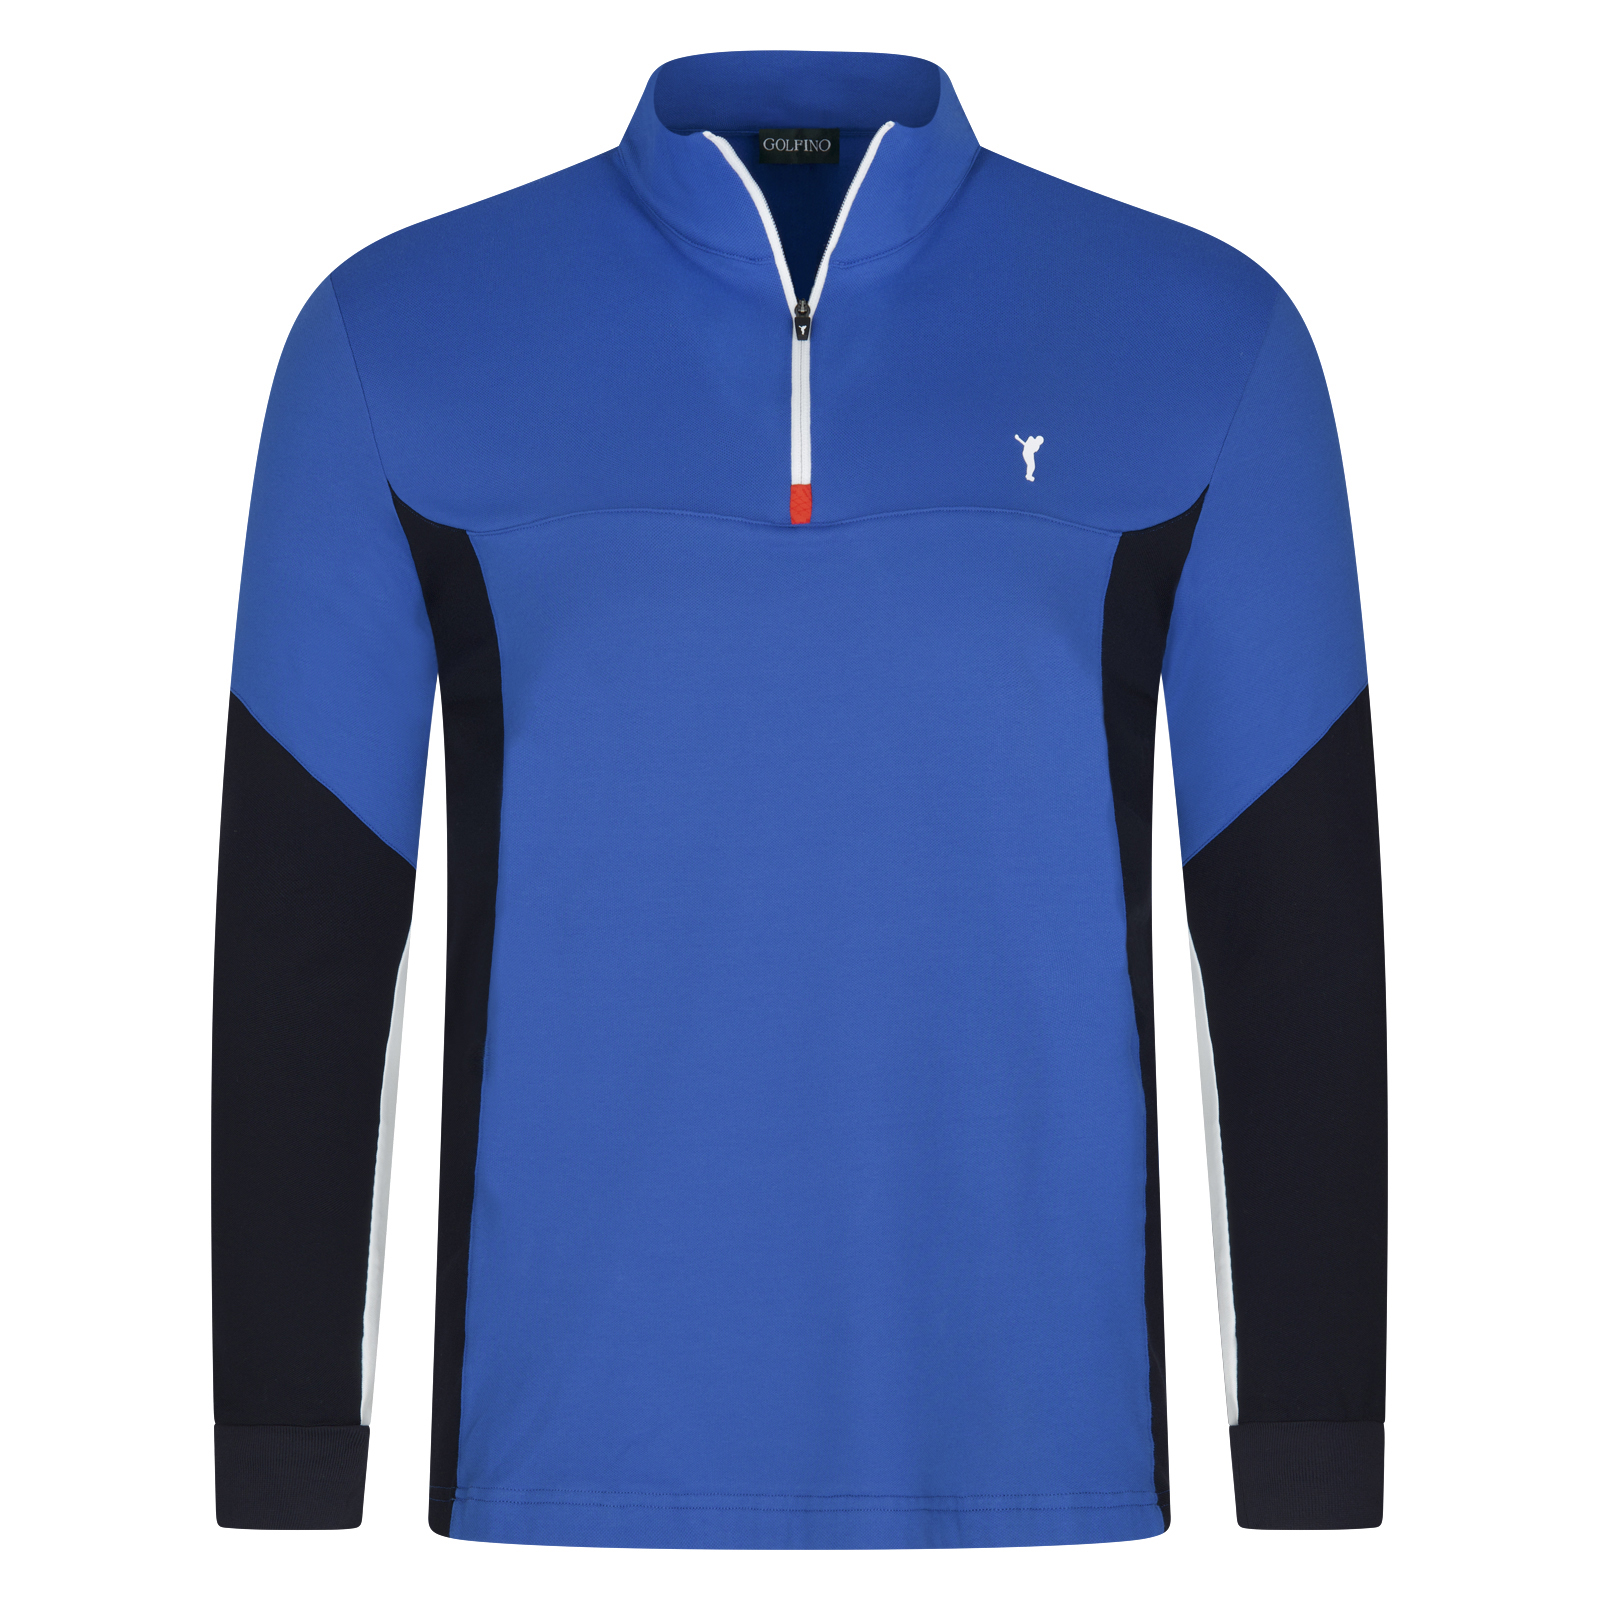 Men's breathable midlayer golf troyer with UV protection